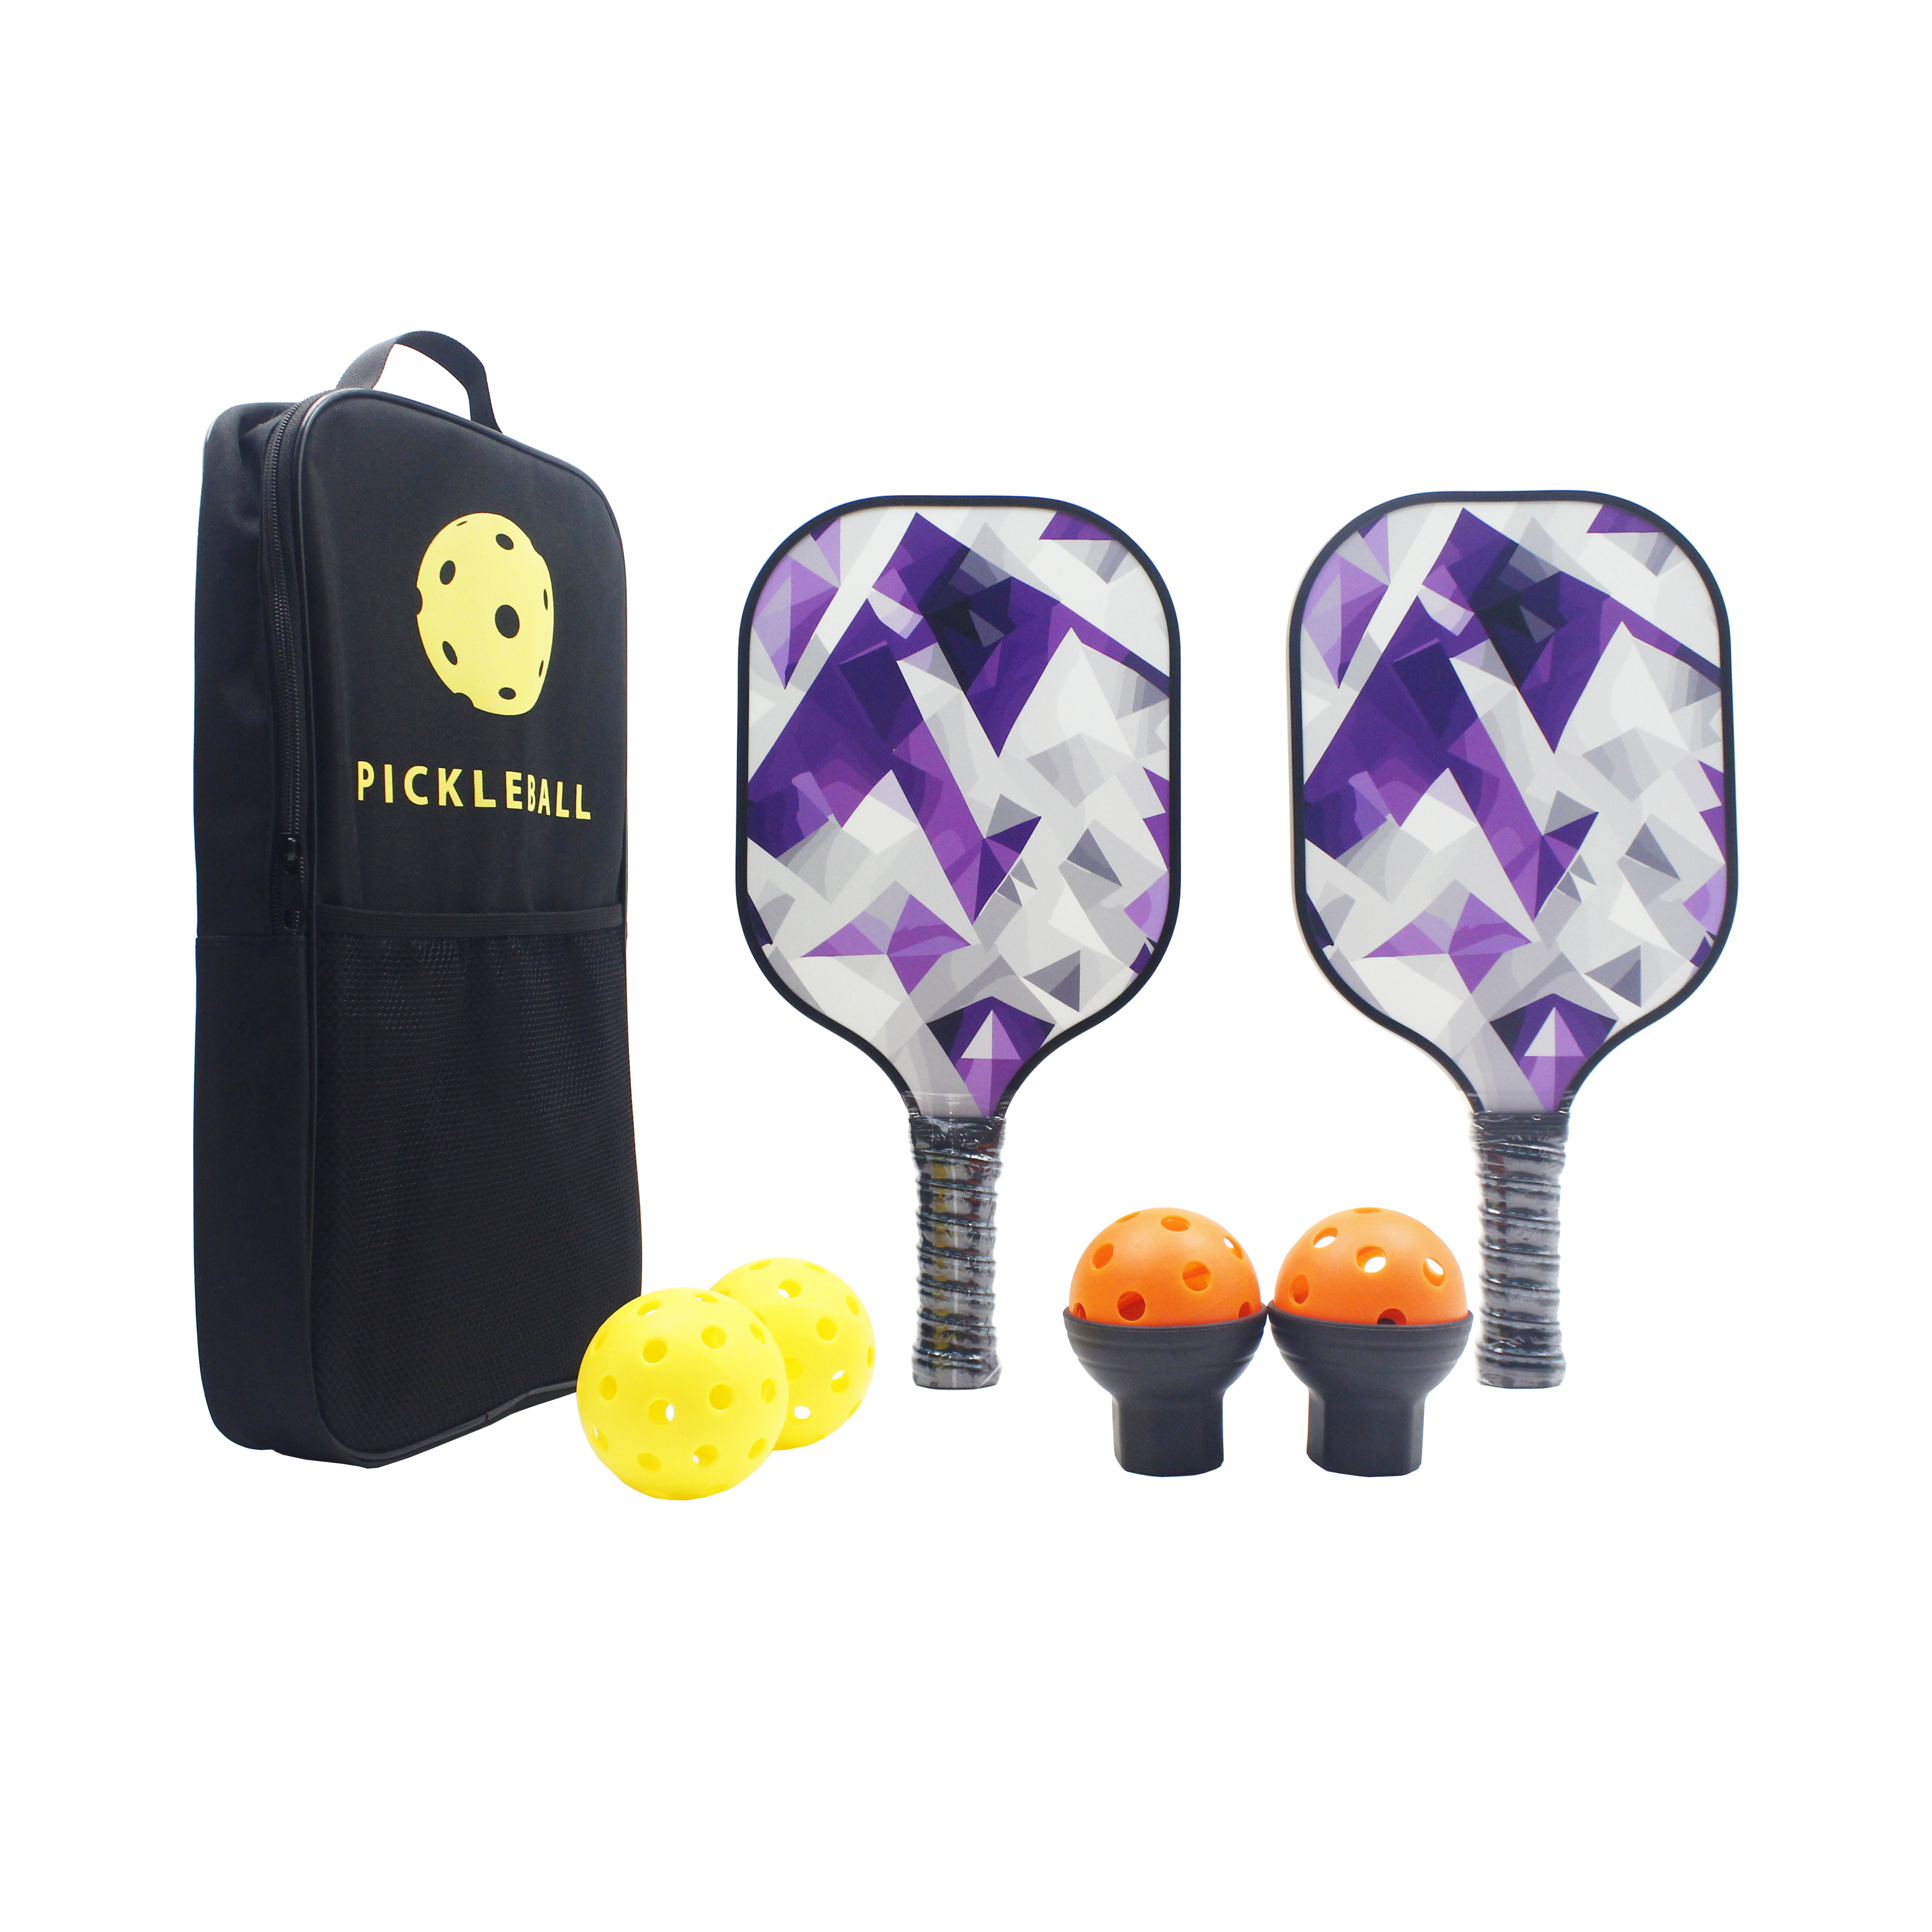 Factory Price Graphite Pickleball Paddles Set 2 Paddles 4 Balls 1 Carry Bag With Ball Retriver